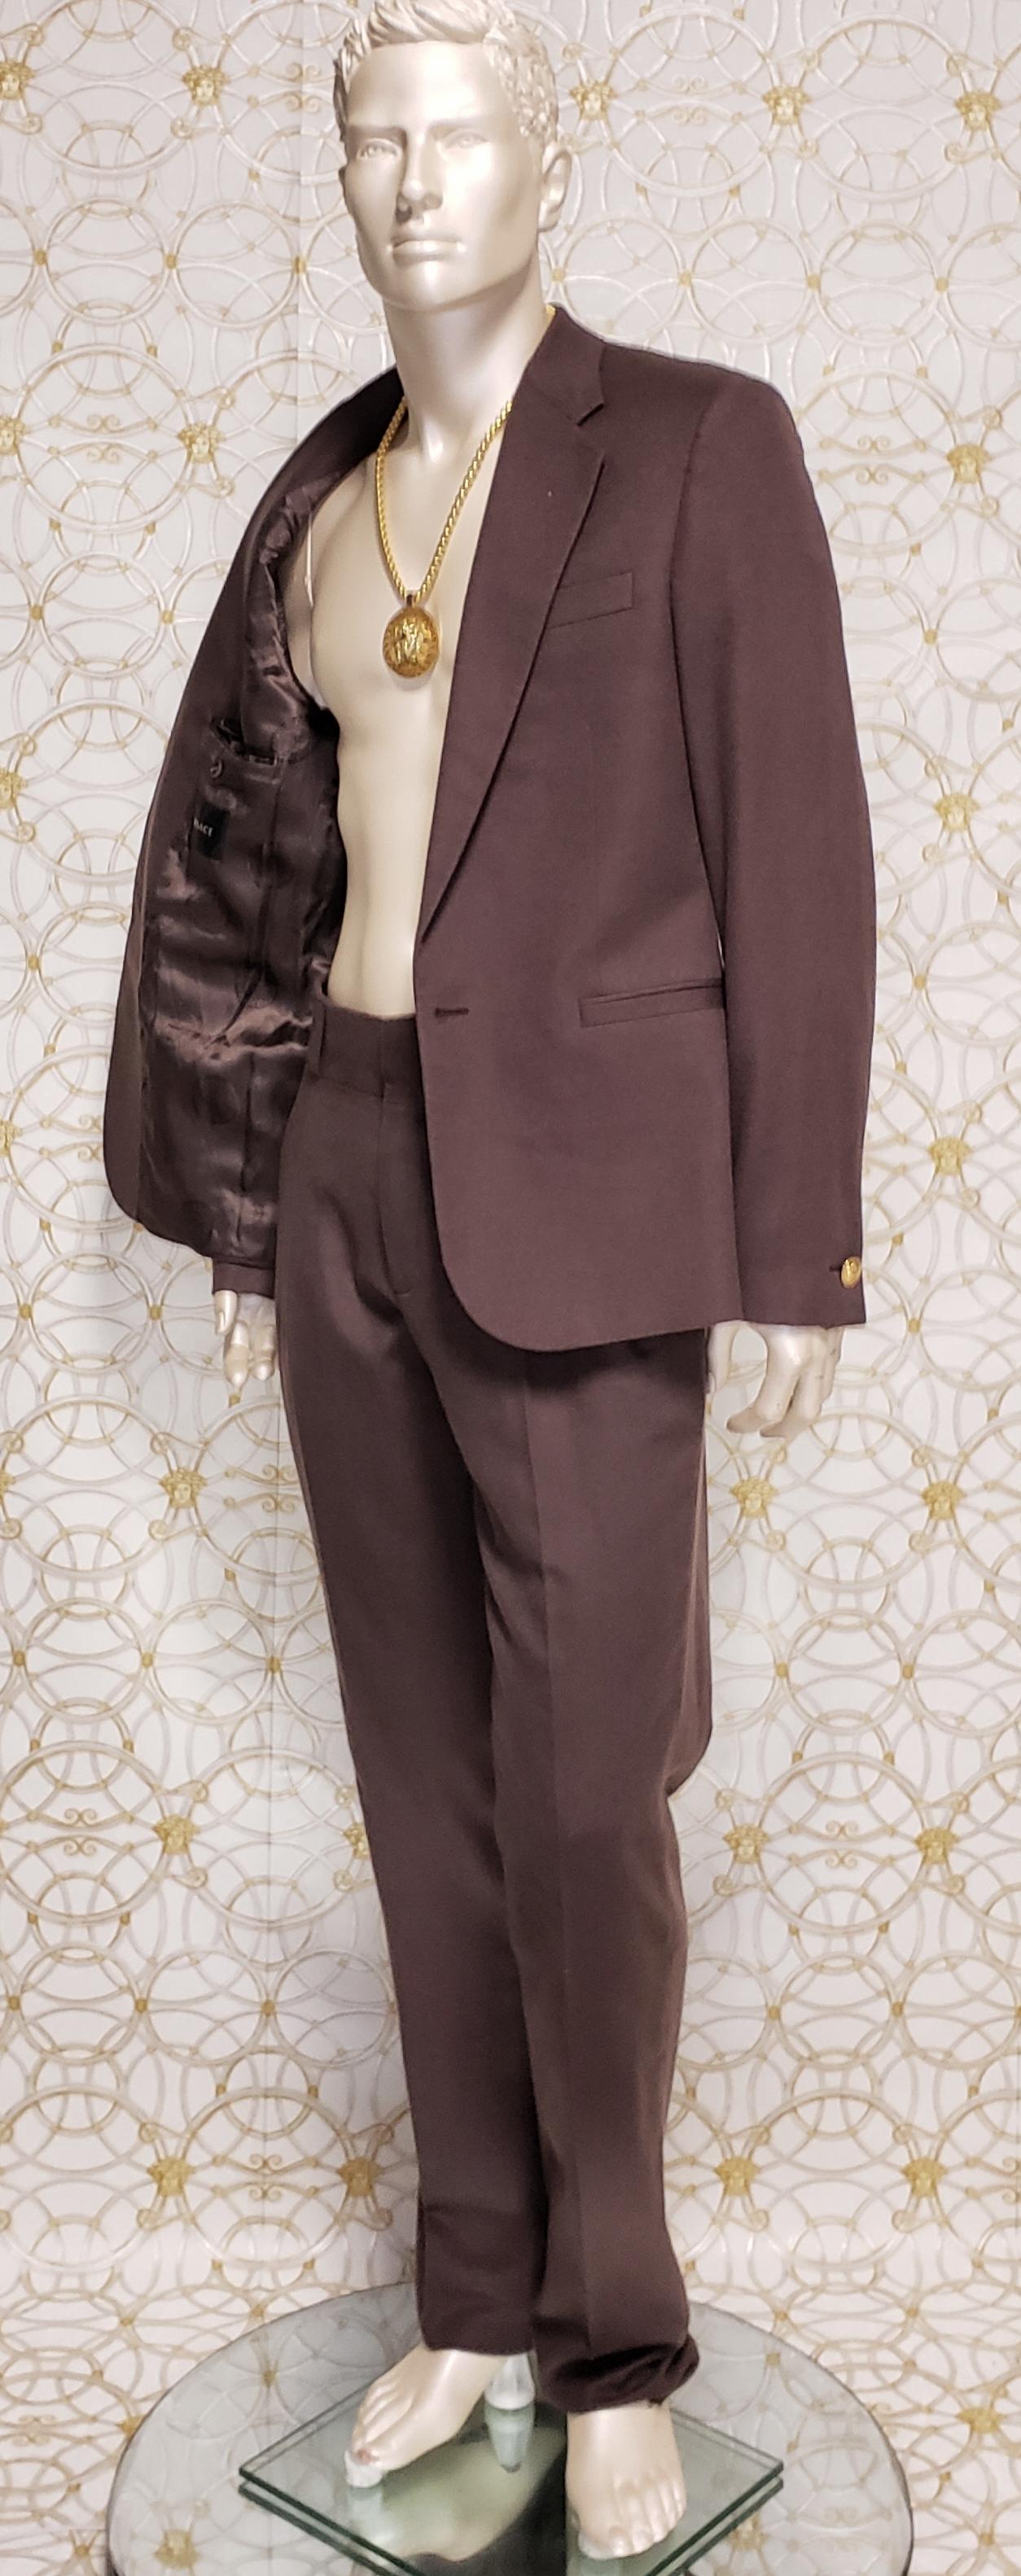 F/W 2015 look # 3 BRAND NEW VERSACE BROWN CASHMERE and SILK SUIT 50 - 40 (L) For Sale 2